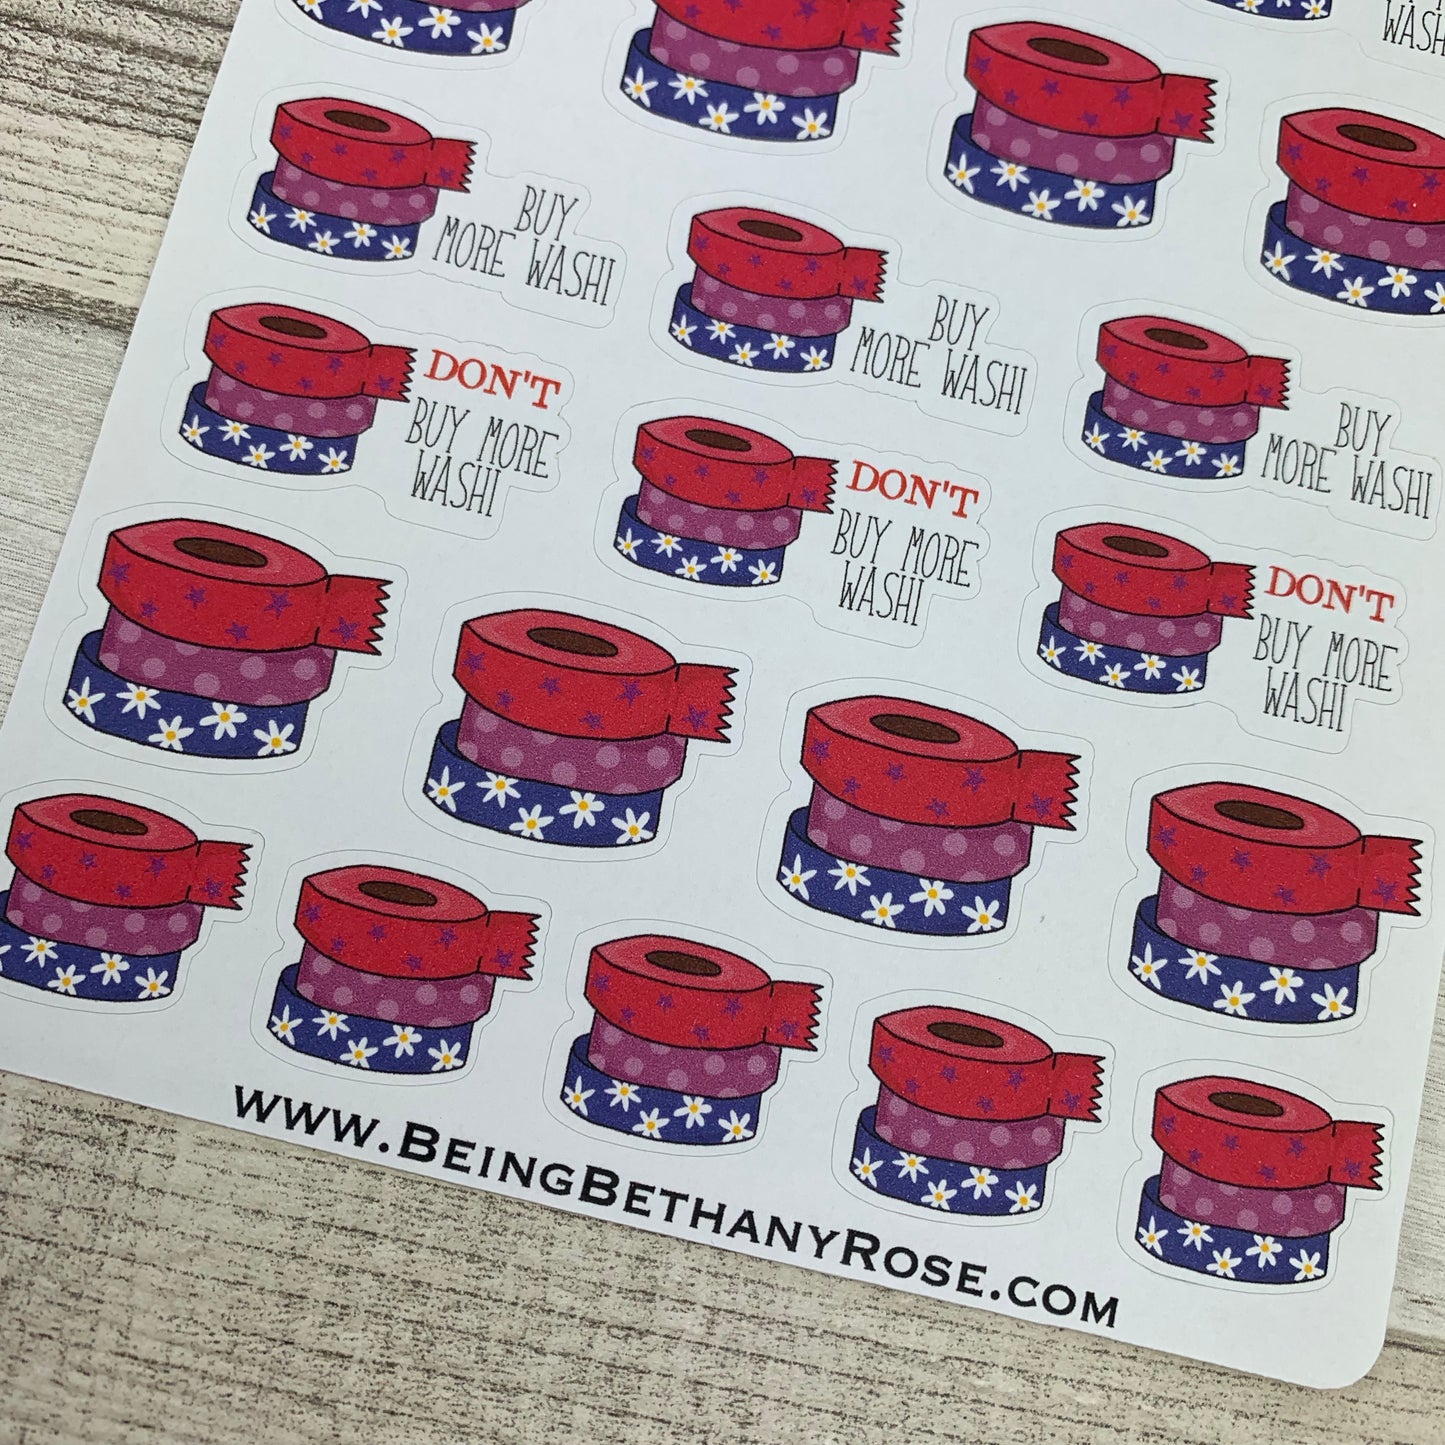 Buy or don't buy wash tape stickers (DPD1257)